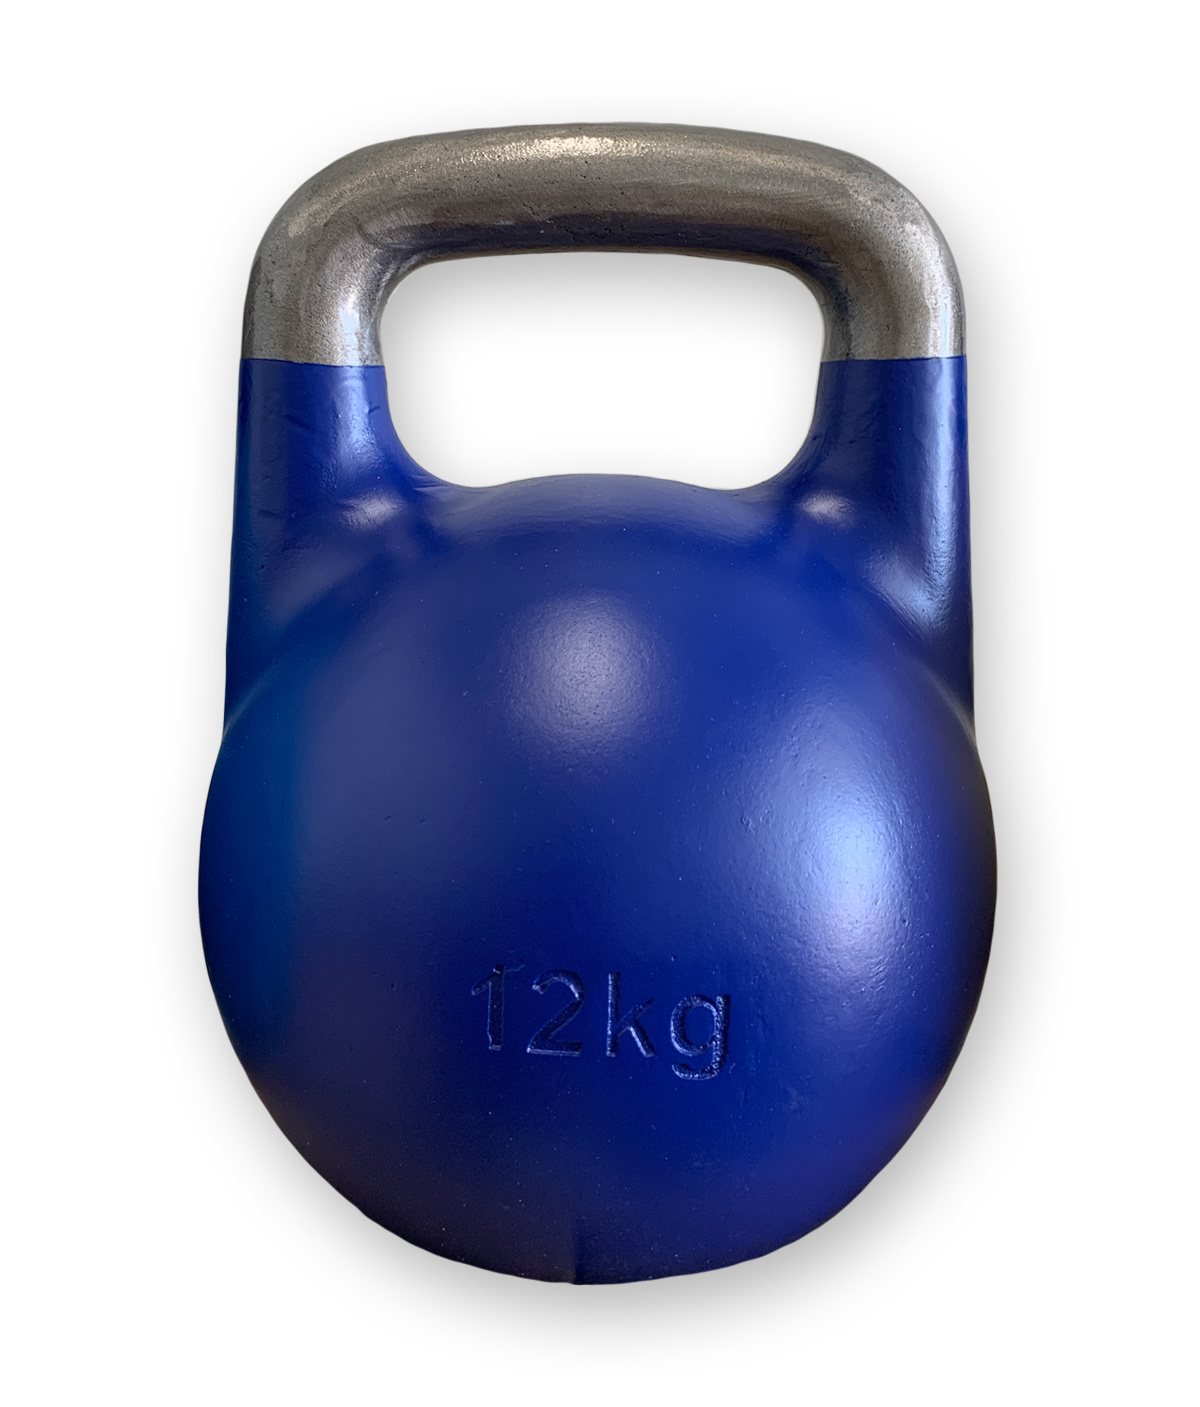 Competition kettlebell 20 kg staal - competitie kettlebell